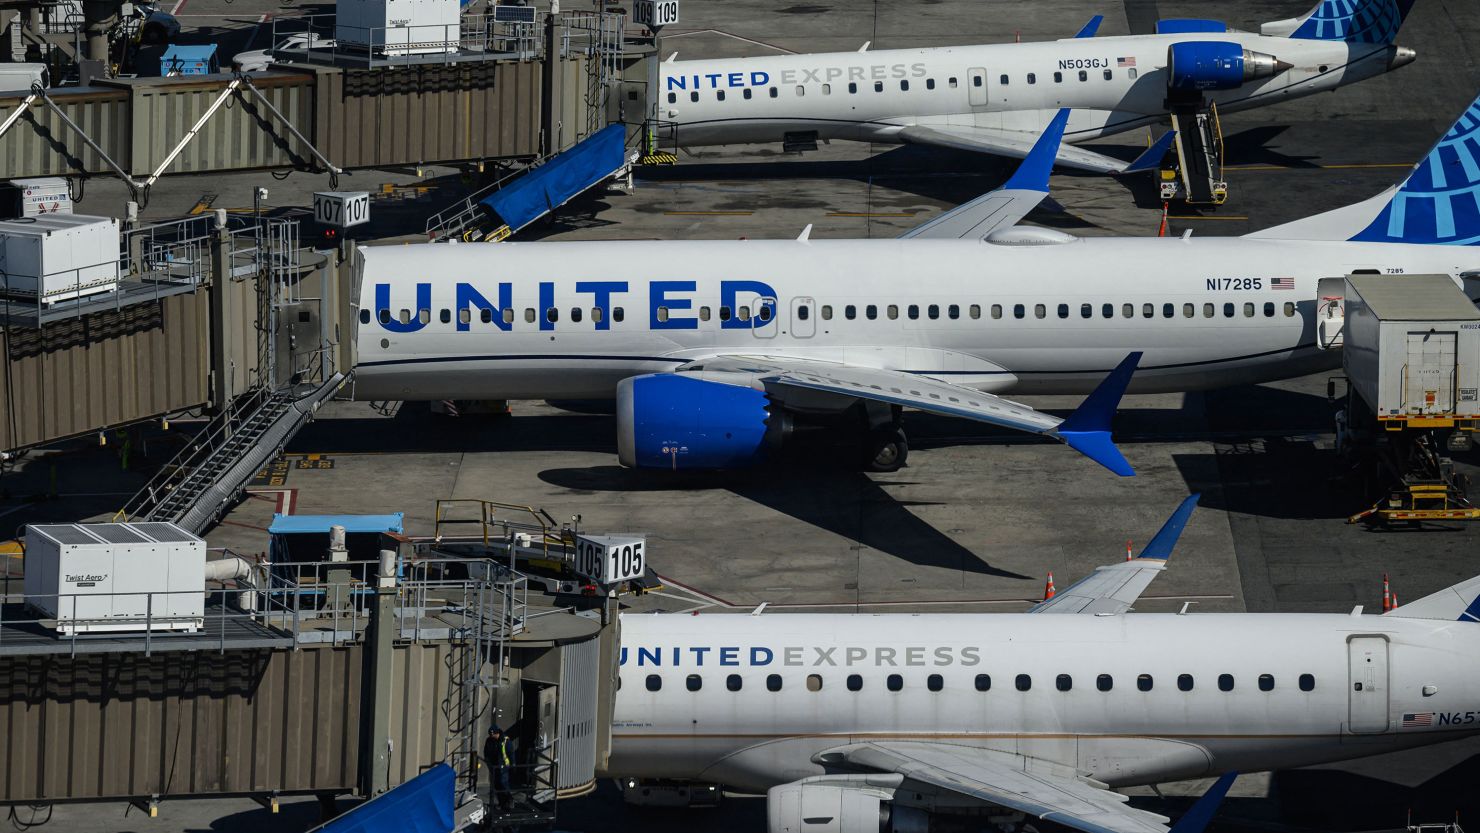 United Airlines planes parked at Newark Liberty International Airport in Newark, New Jersey.